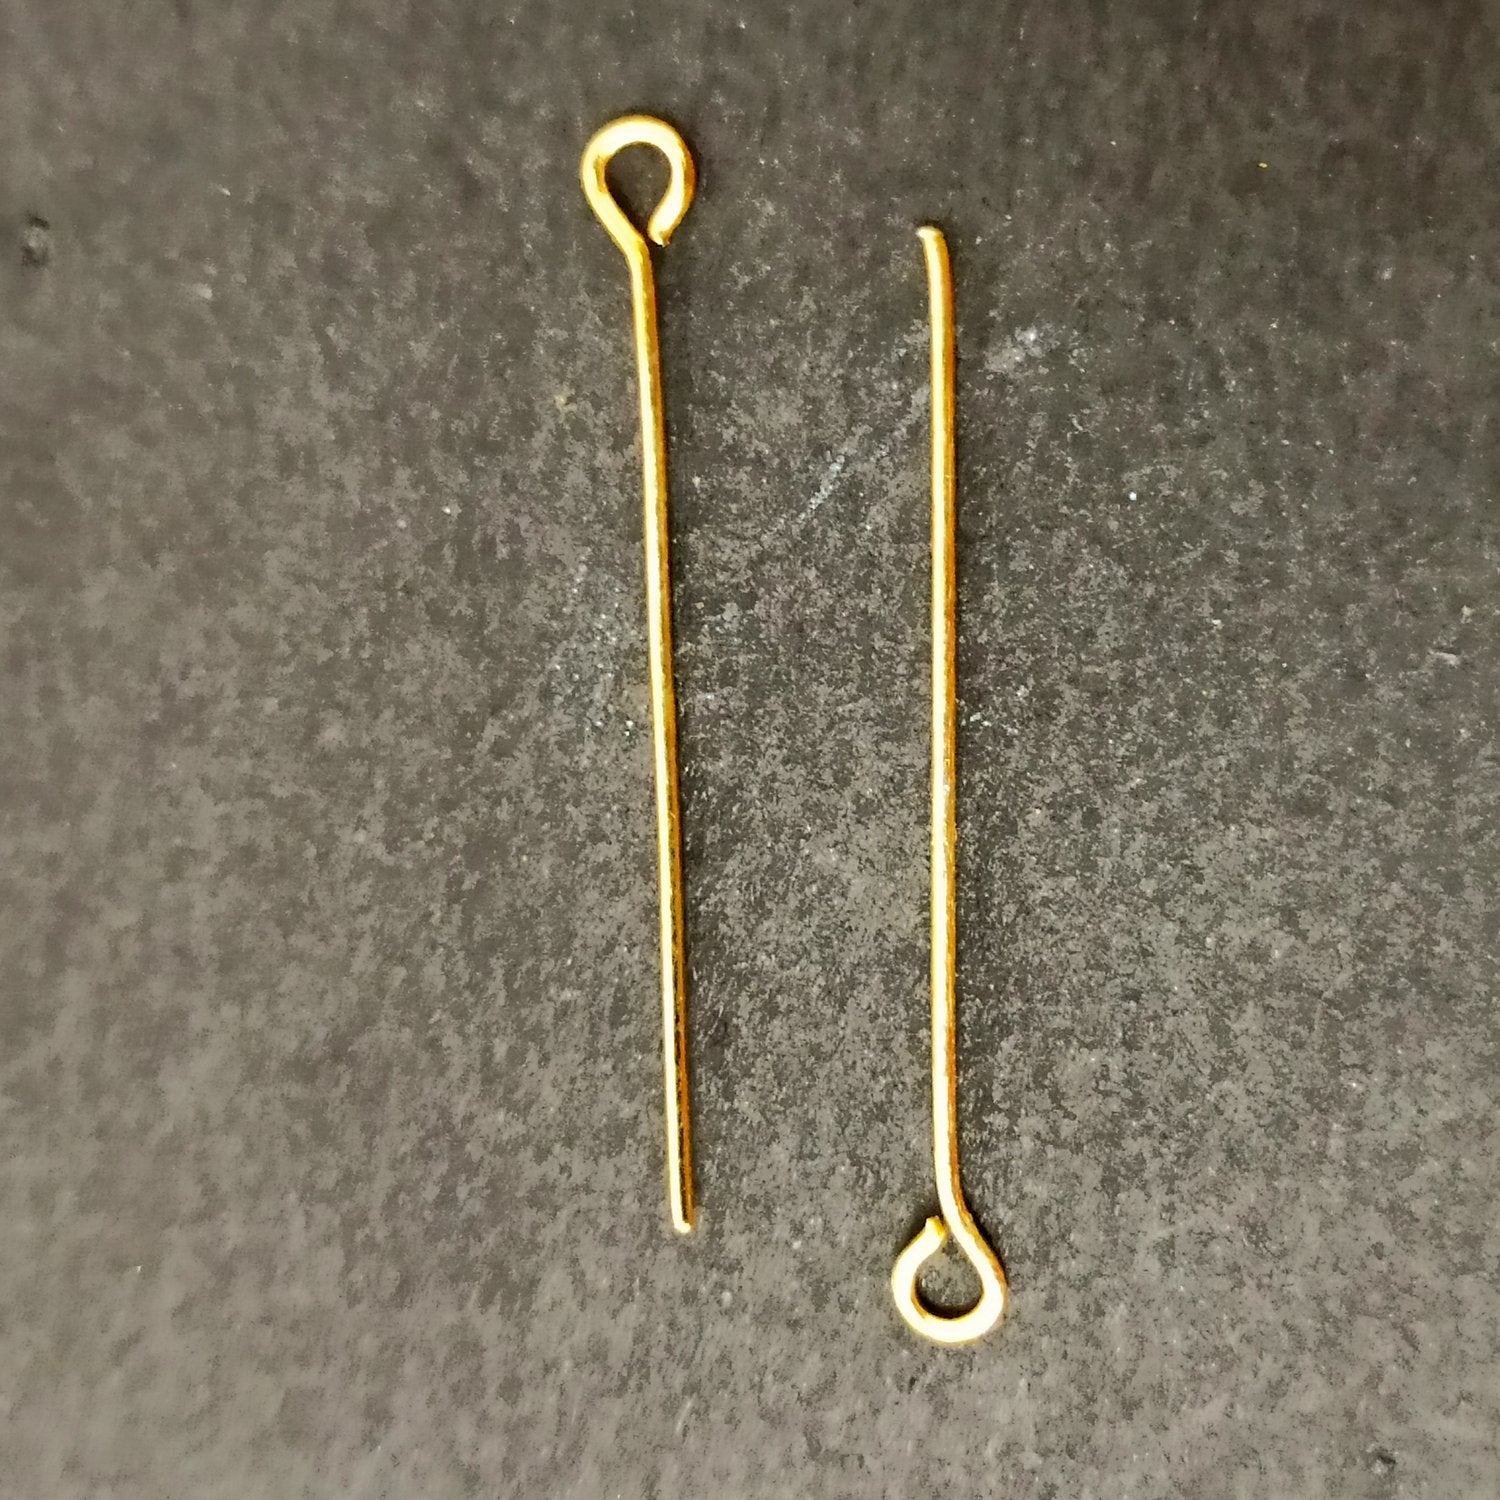 Golden Eye Pins at Rs 200.00  आई पिन, ऑय पिन